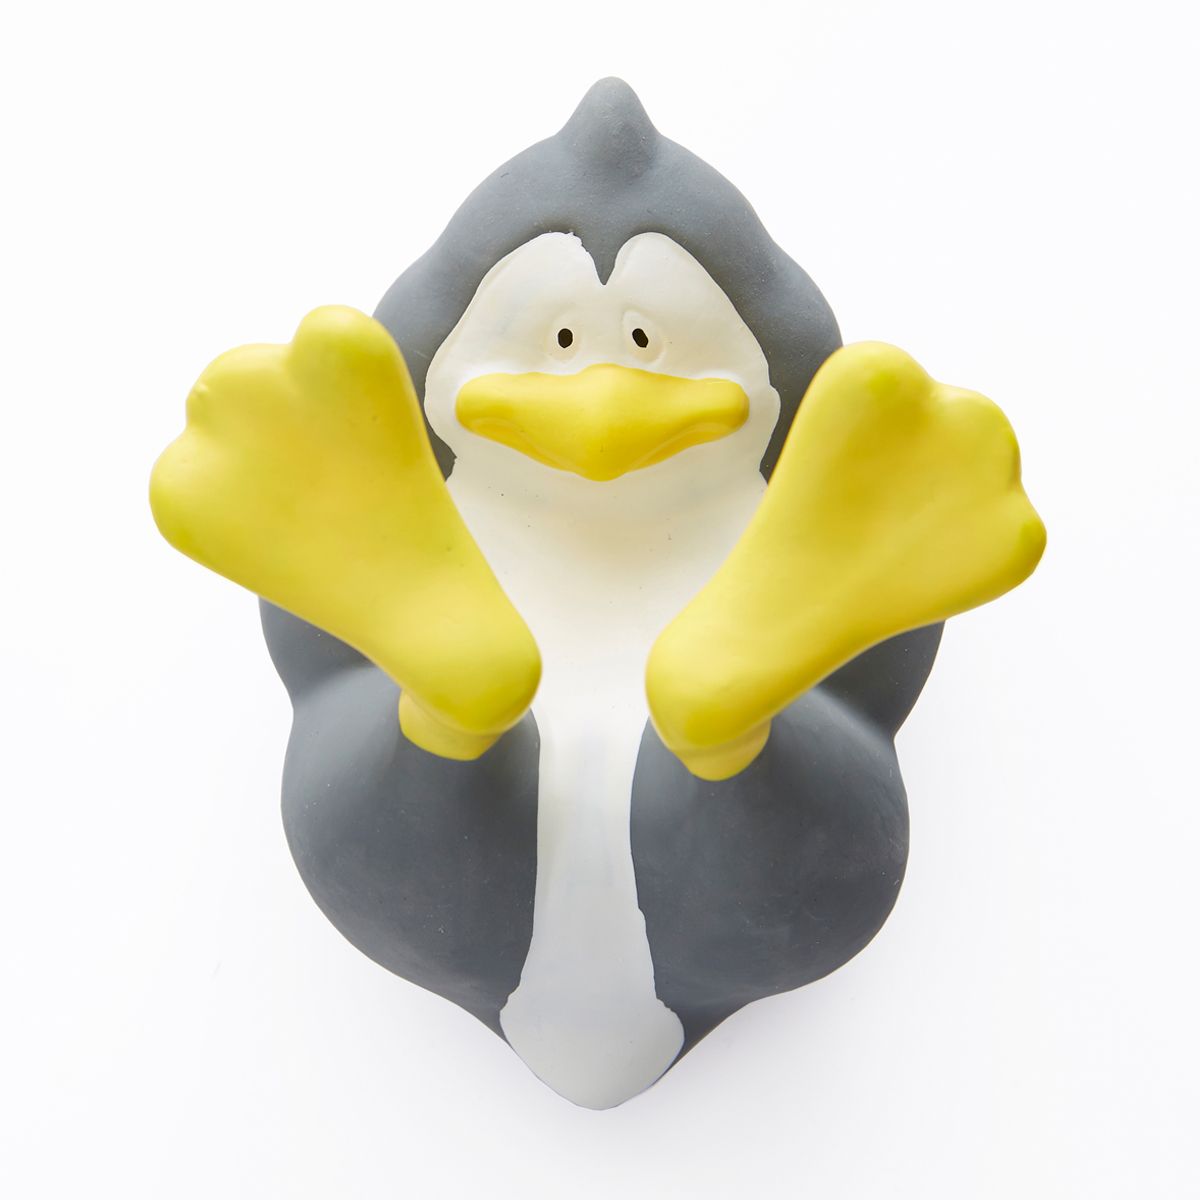 Penguin bath and pool toy, made from natural rubber. Can be used as a teether.